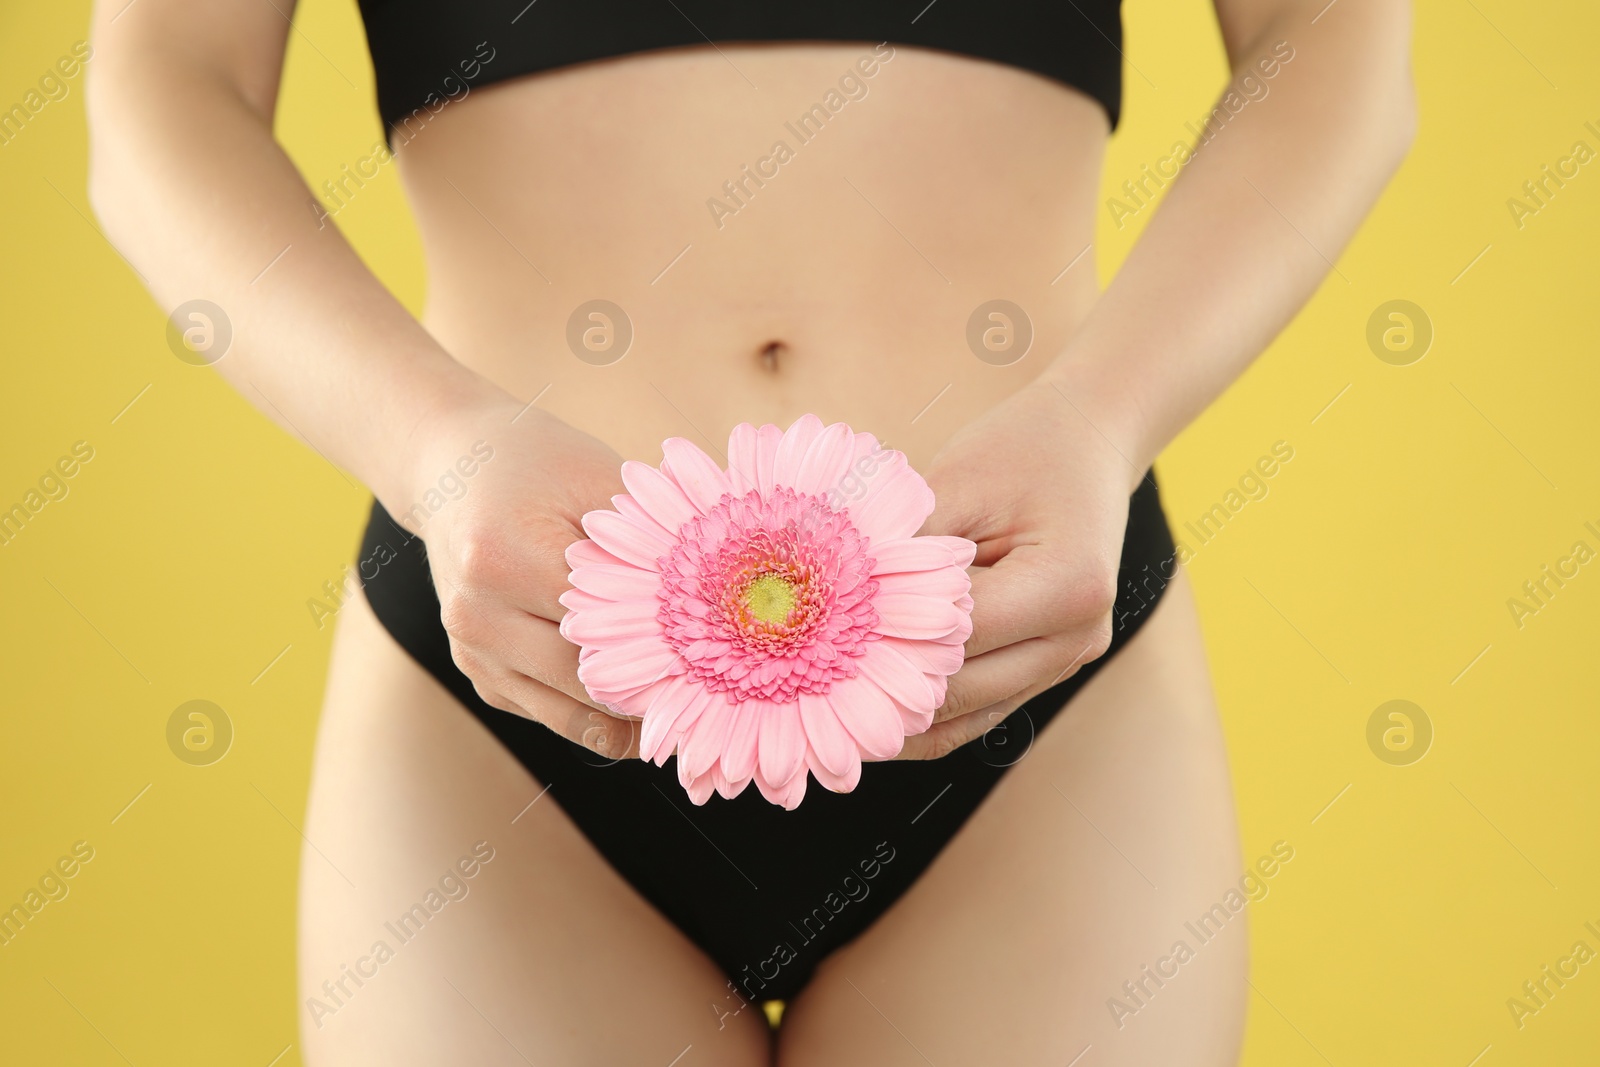 Photo of Gynecology. Woman in underwear with gerbera flower on yellow background, closeup